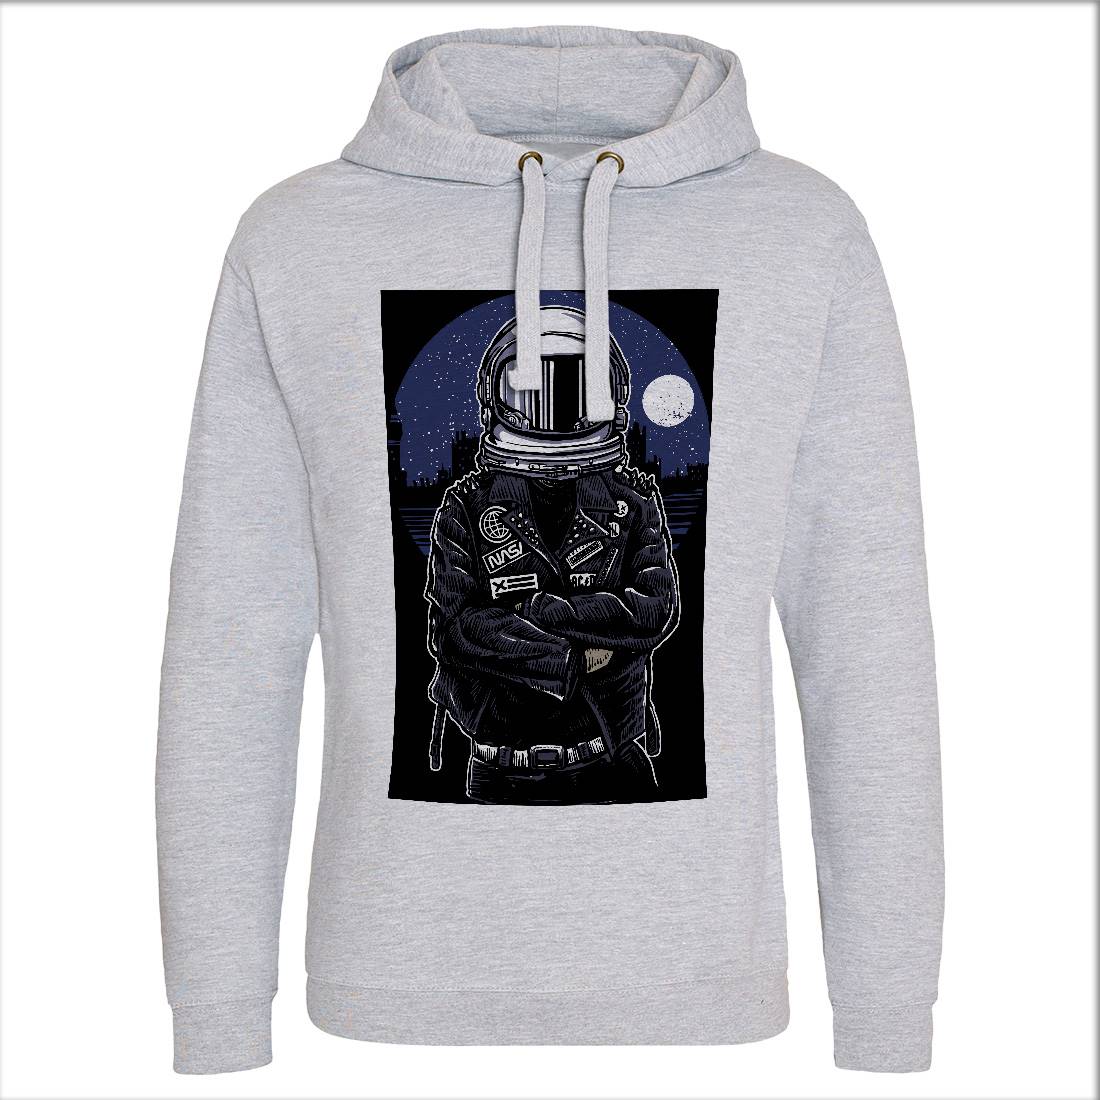 Astronaut Rebel Mens Hoodie Without Pocket Space A508